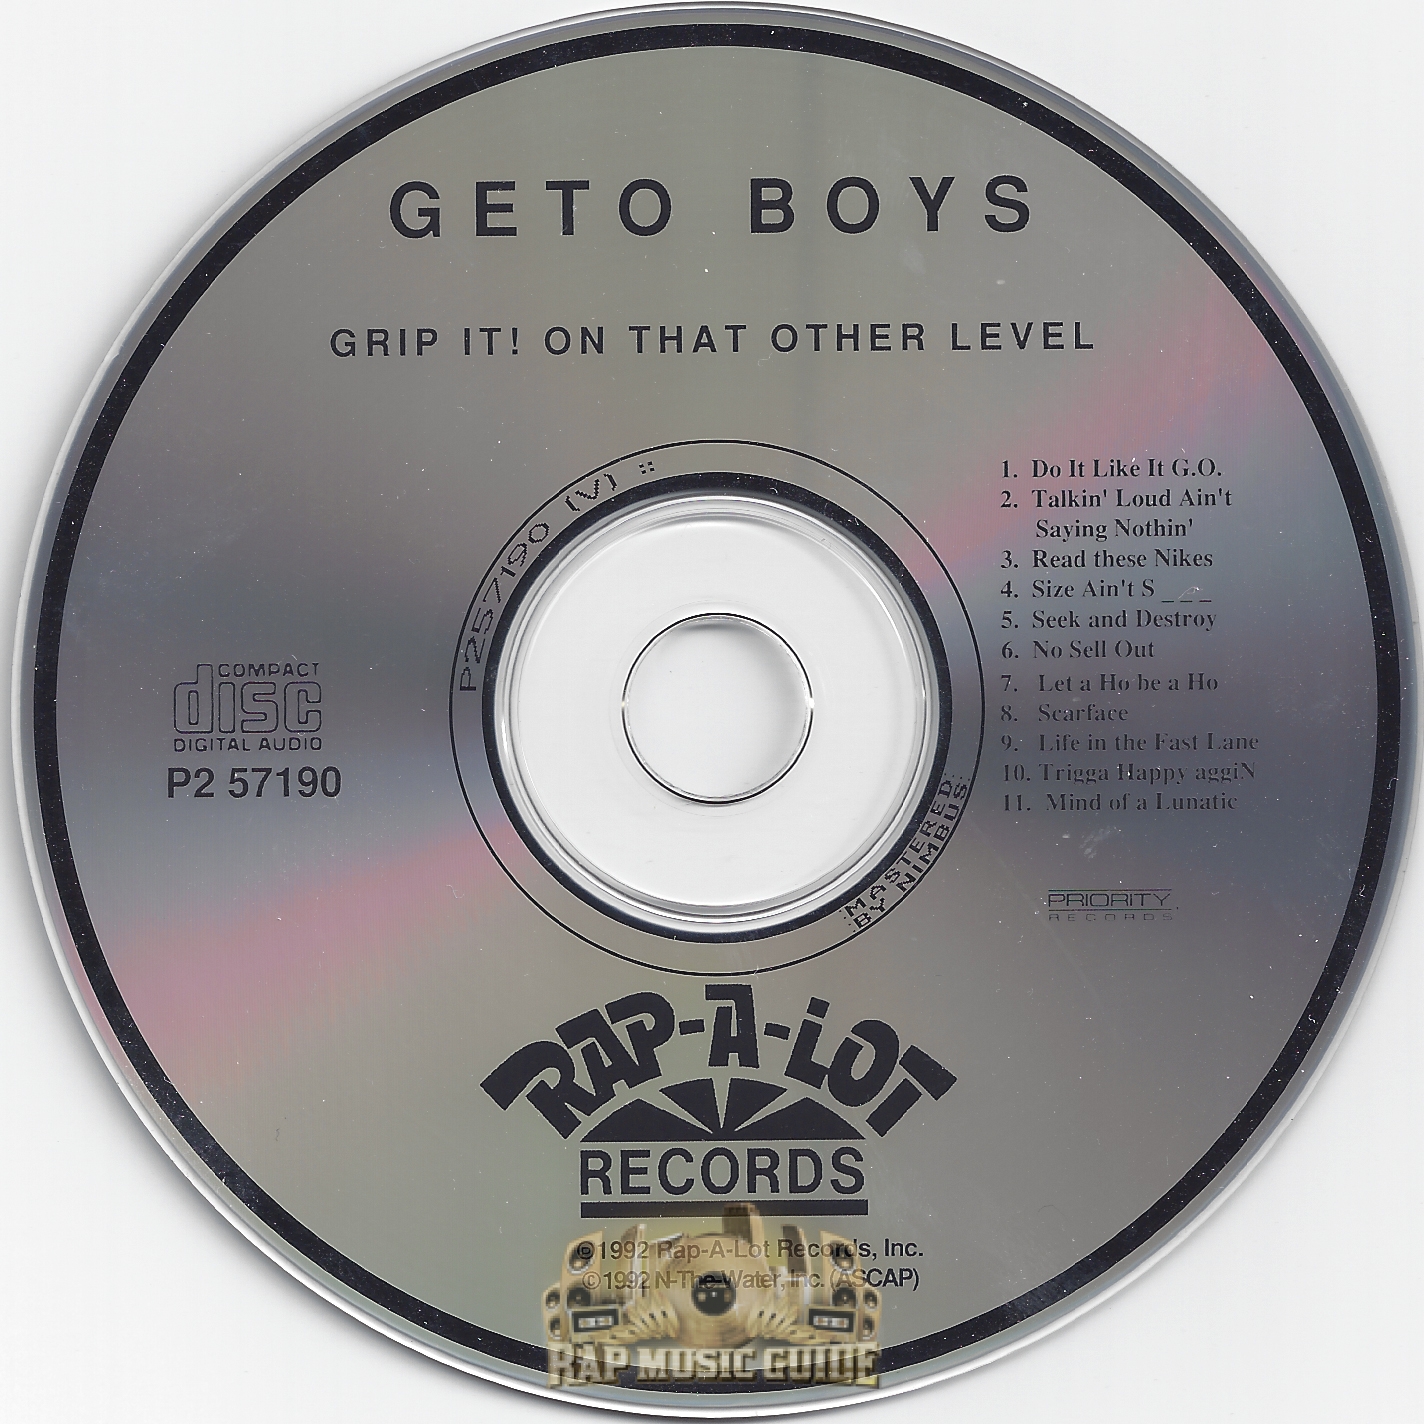 Geto Boys Grip It! On That Other Level cd